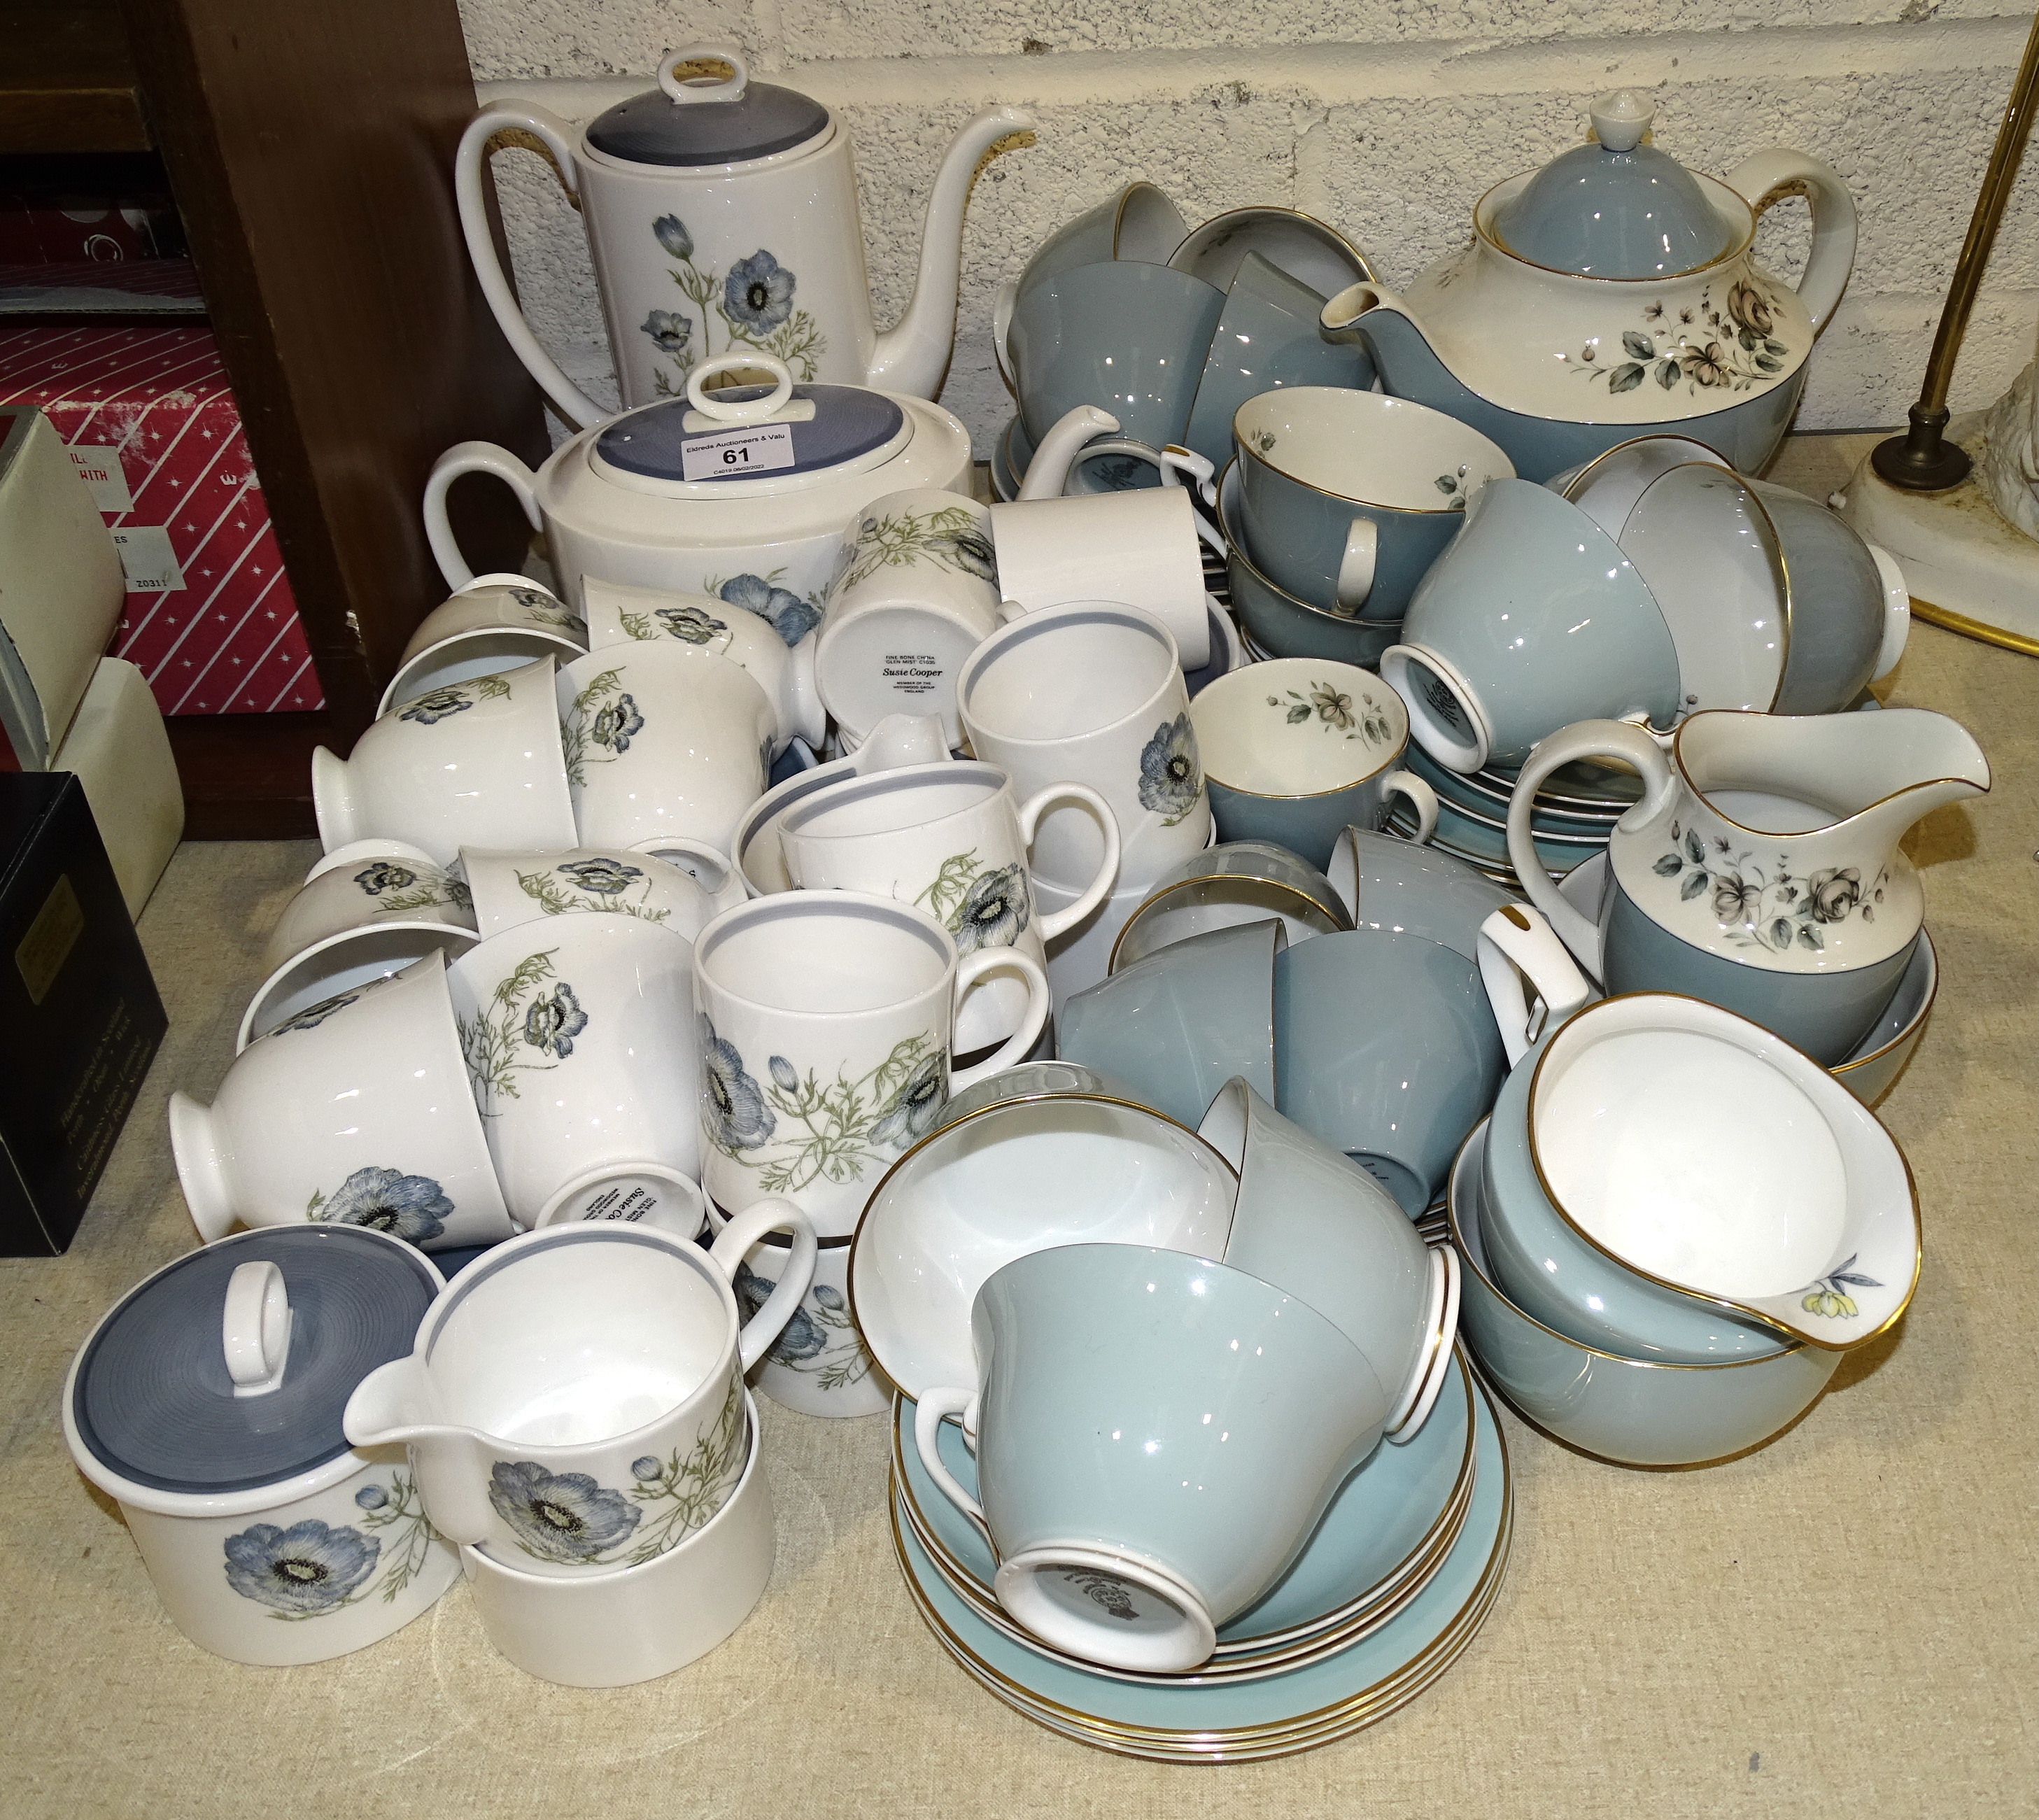 Thirty-eight pieces of Susie Cooper 'Glen Mist' tea and coffee ware, twenty-four pieces of Royal